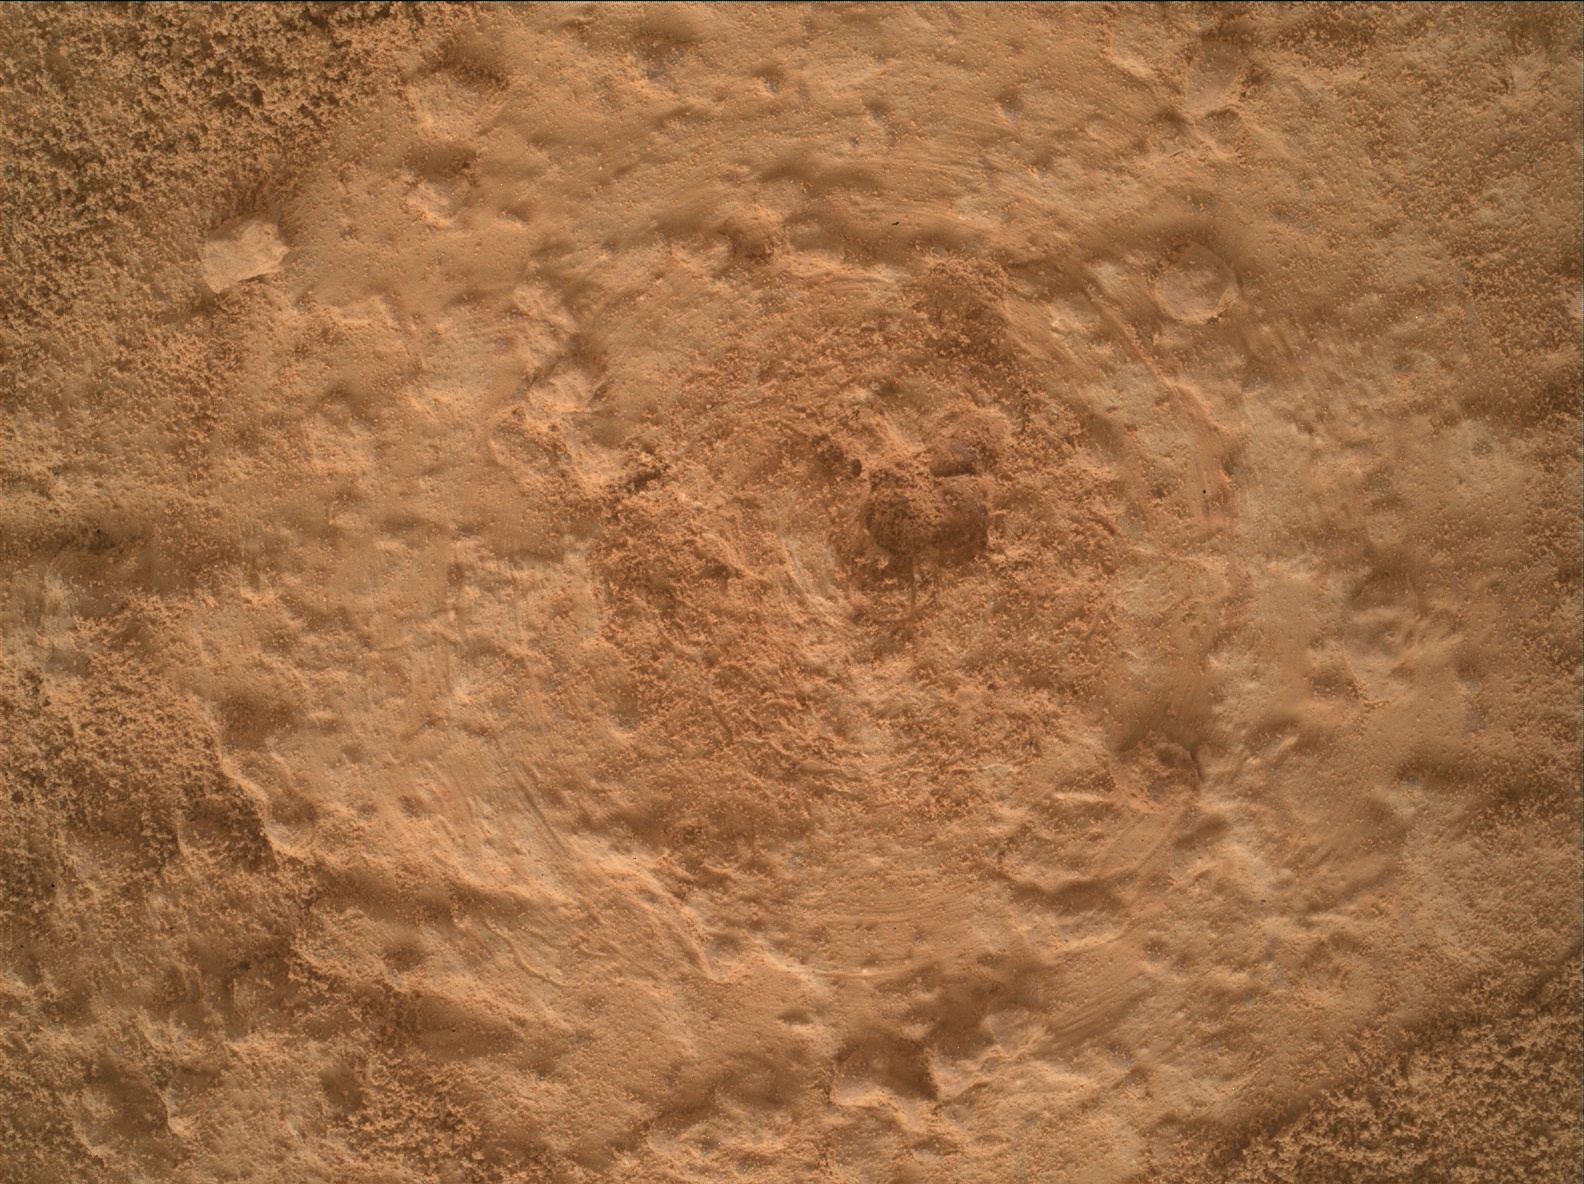 Nasa's Mars rover Curiosity acquired this image using its Mars Hand Lens Imager (MAHLI) on Sol 3472